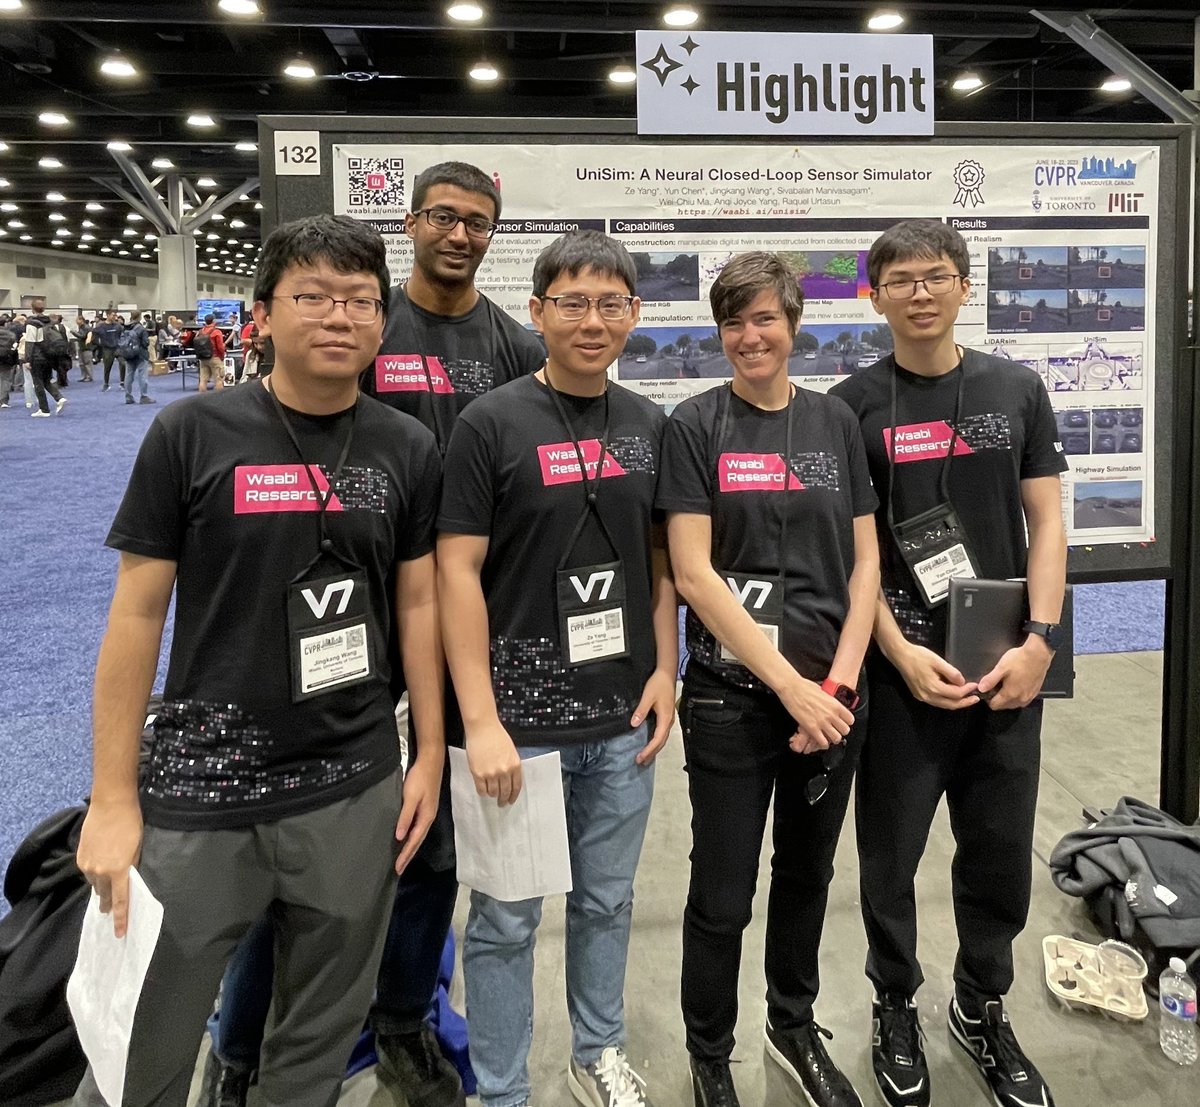 Amazing experience at #CVPR2023! Love this group photo of our incredible team. See everyone in the future conferences ;)